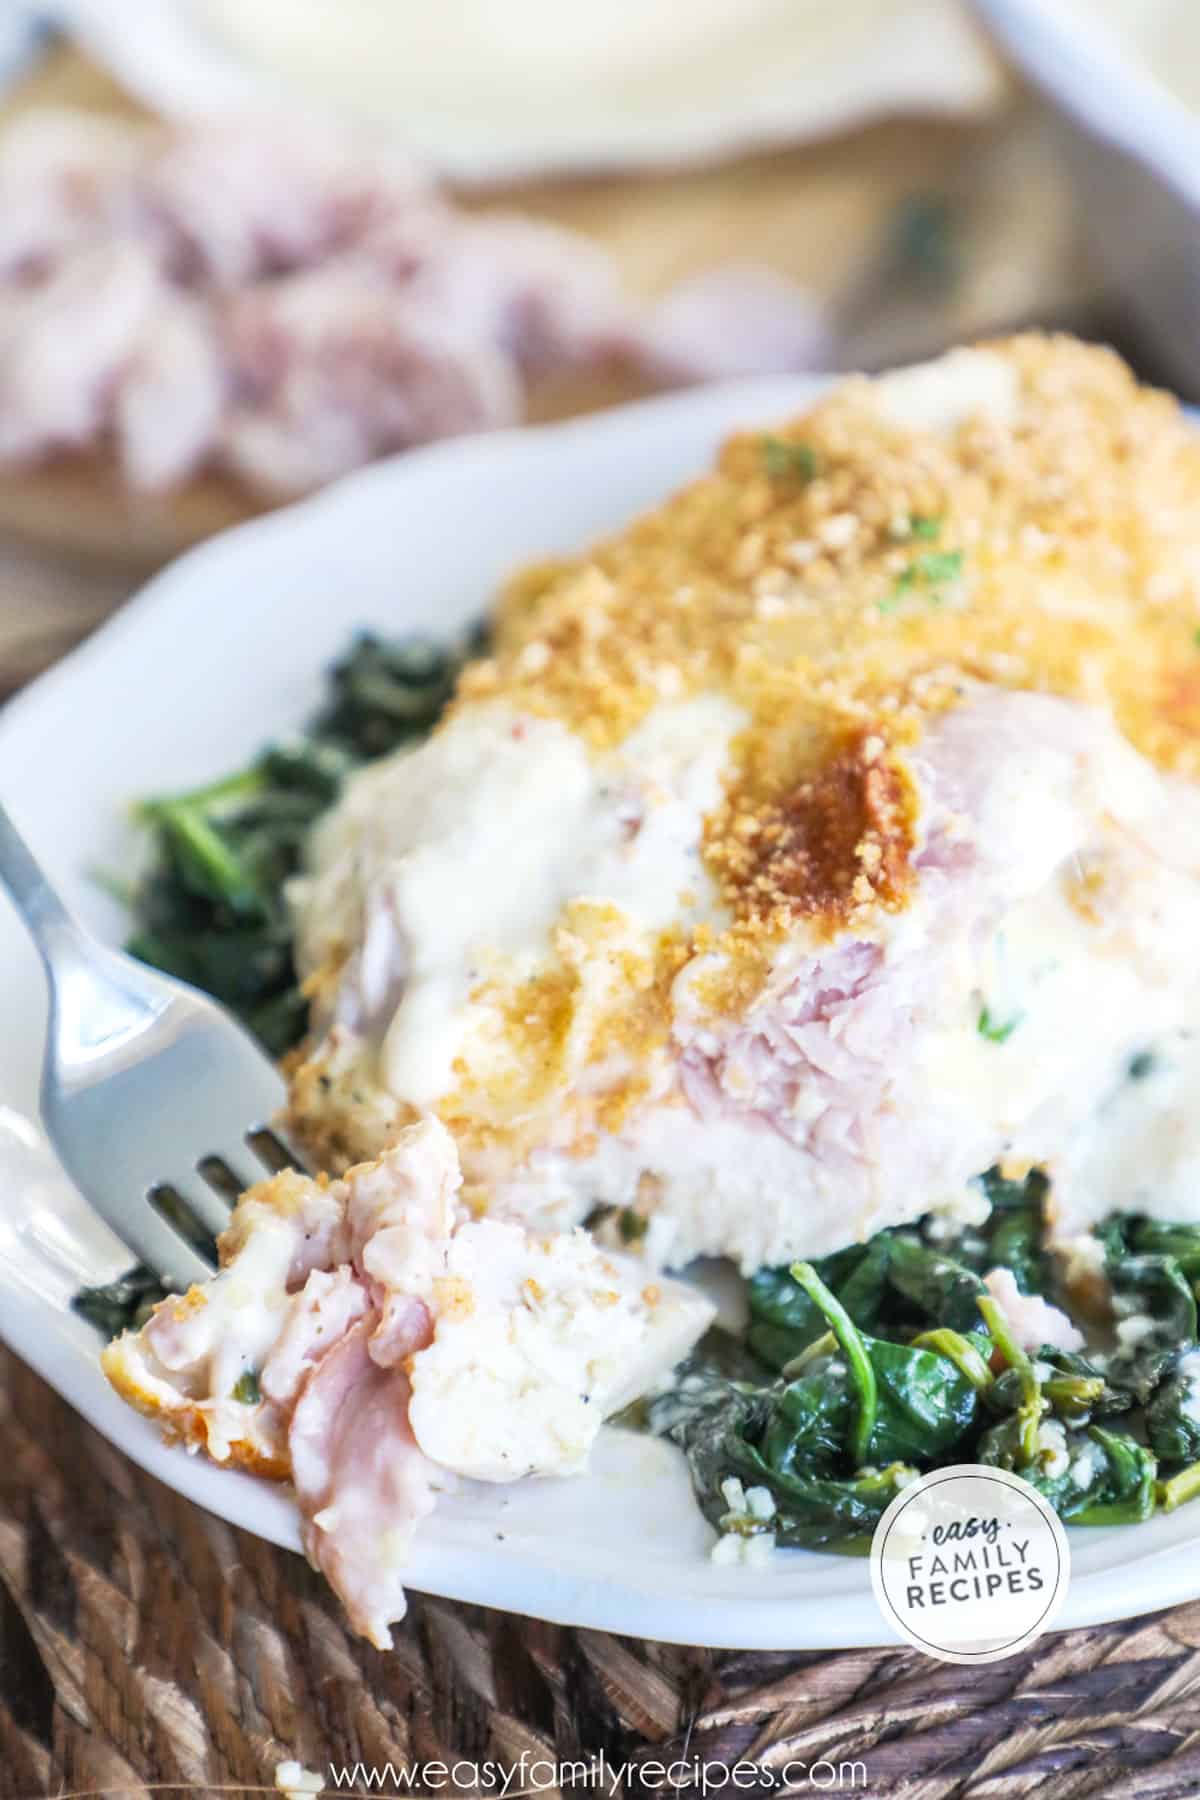 Easy Baked Chicken Cordon Bleu served on a bed of spinach.